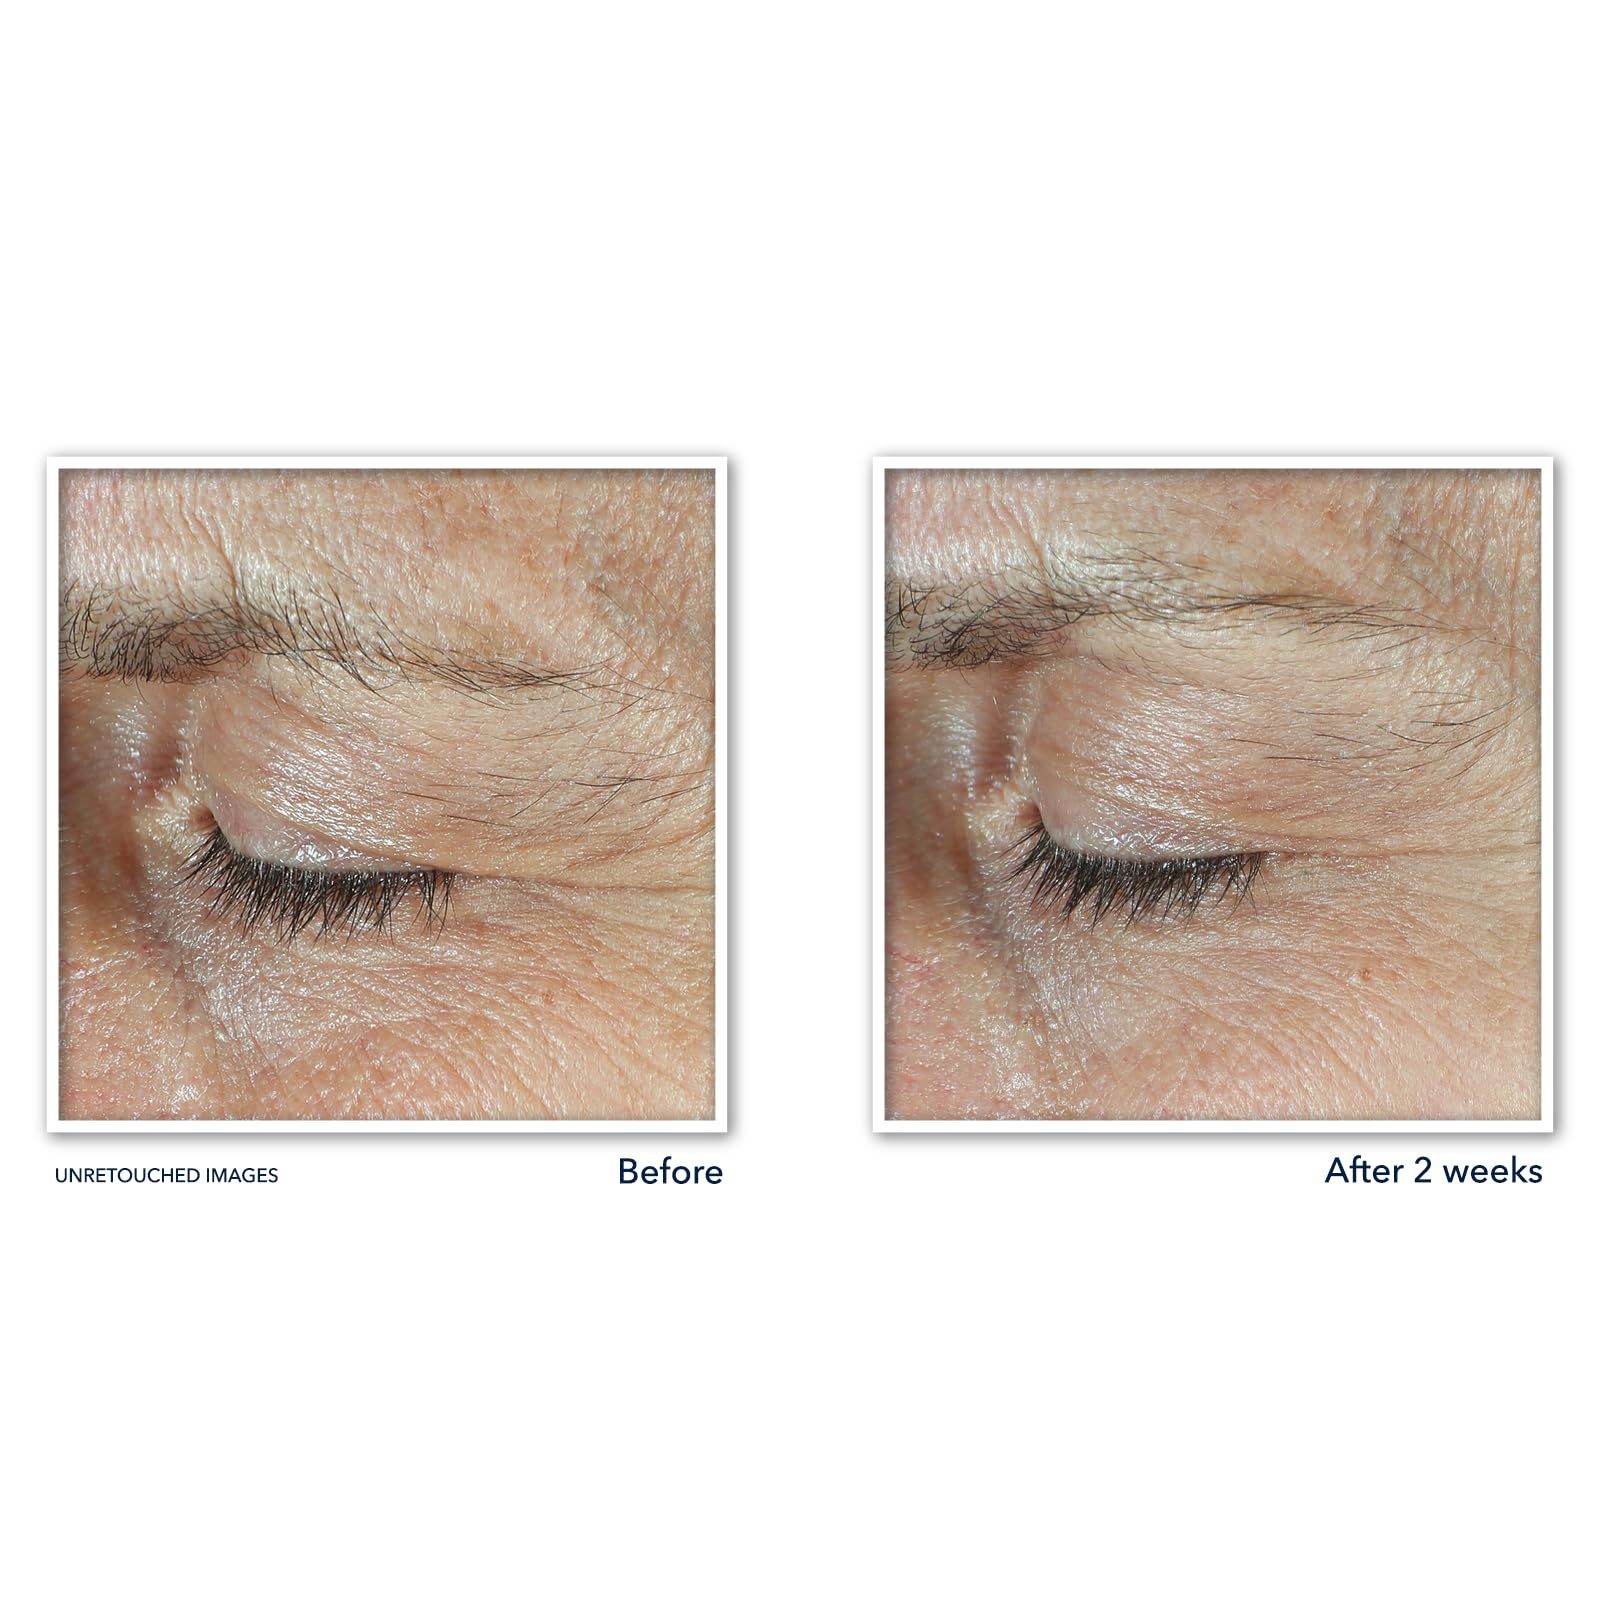 RoC DERM CORREXION DUAL EYE with Line Smoothing Eye Packette